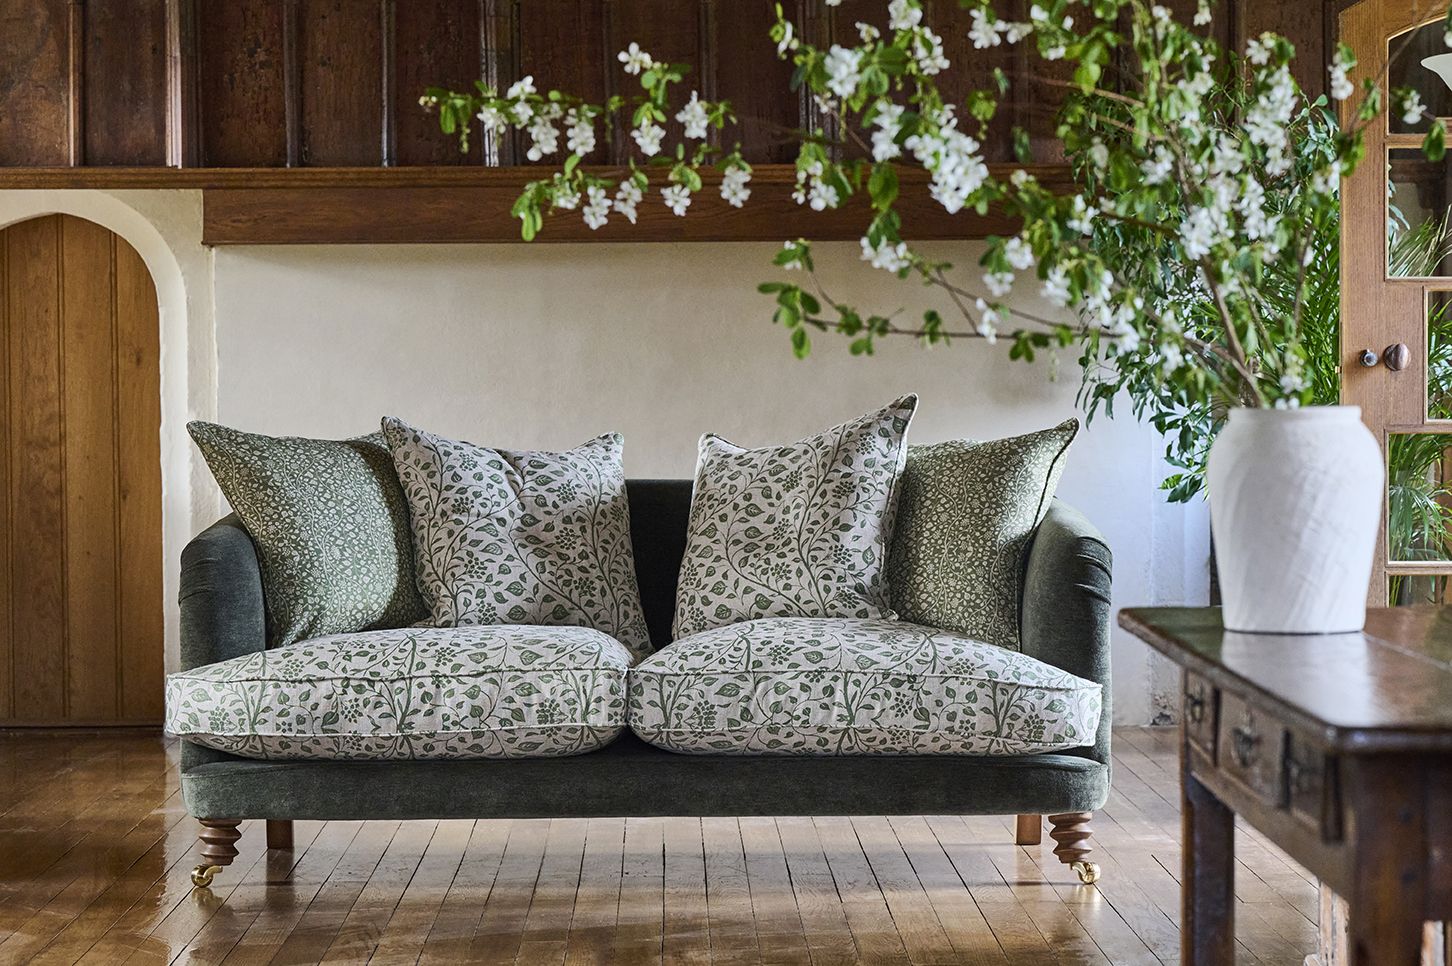 Helmsley 3 Seater Sofa in Mohair Fir with Seat and Back Cushions in Trailing Ivy Olive and Small Trailing Ivy Olive